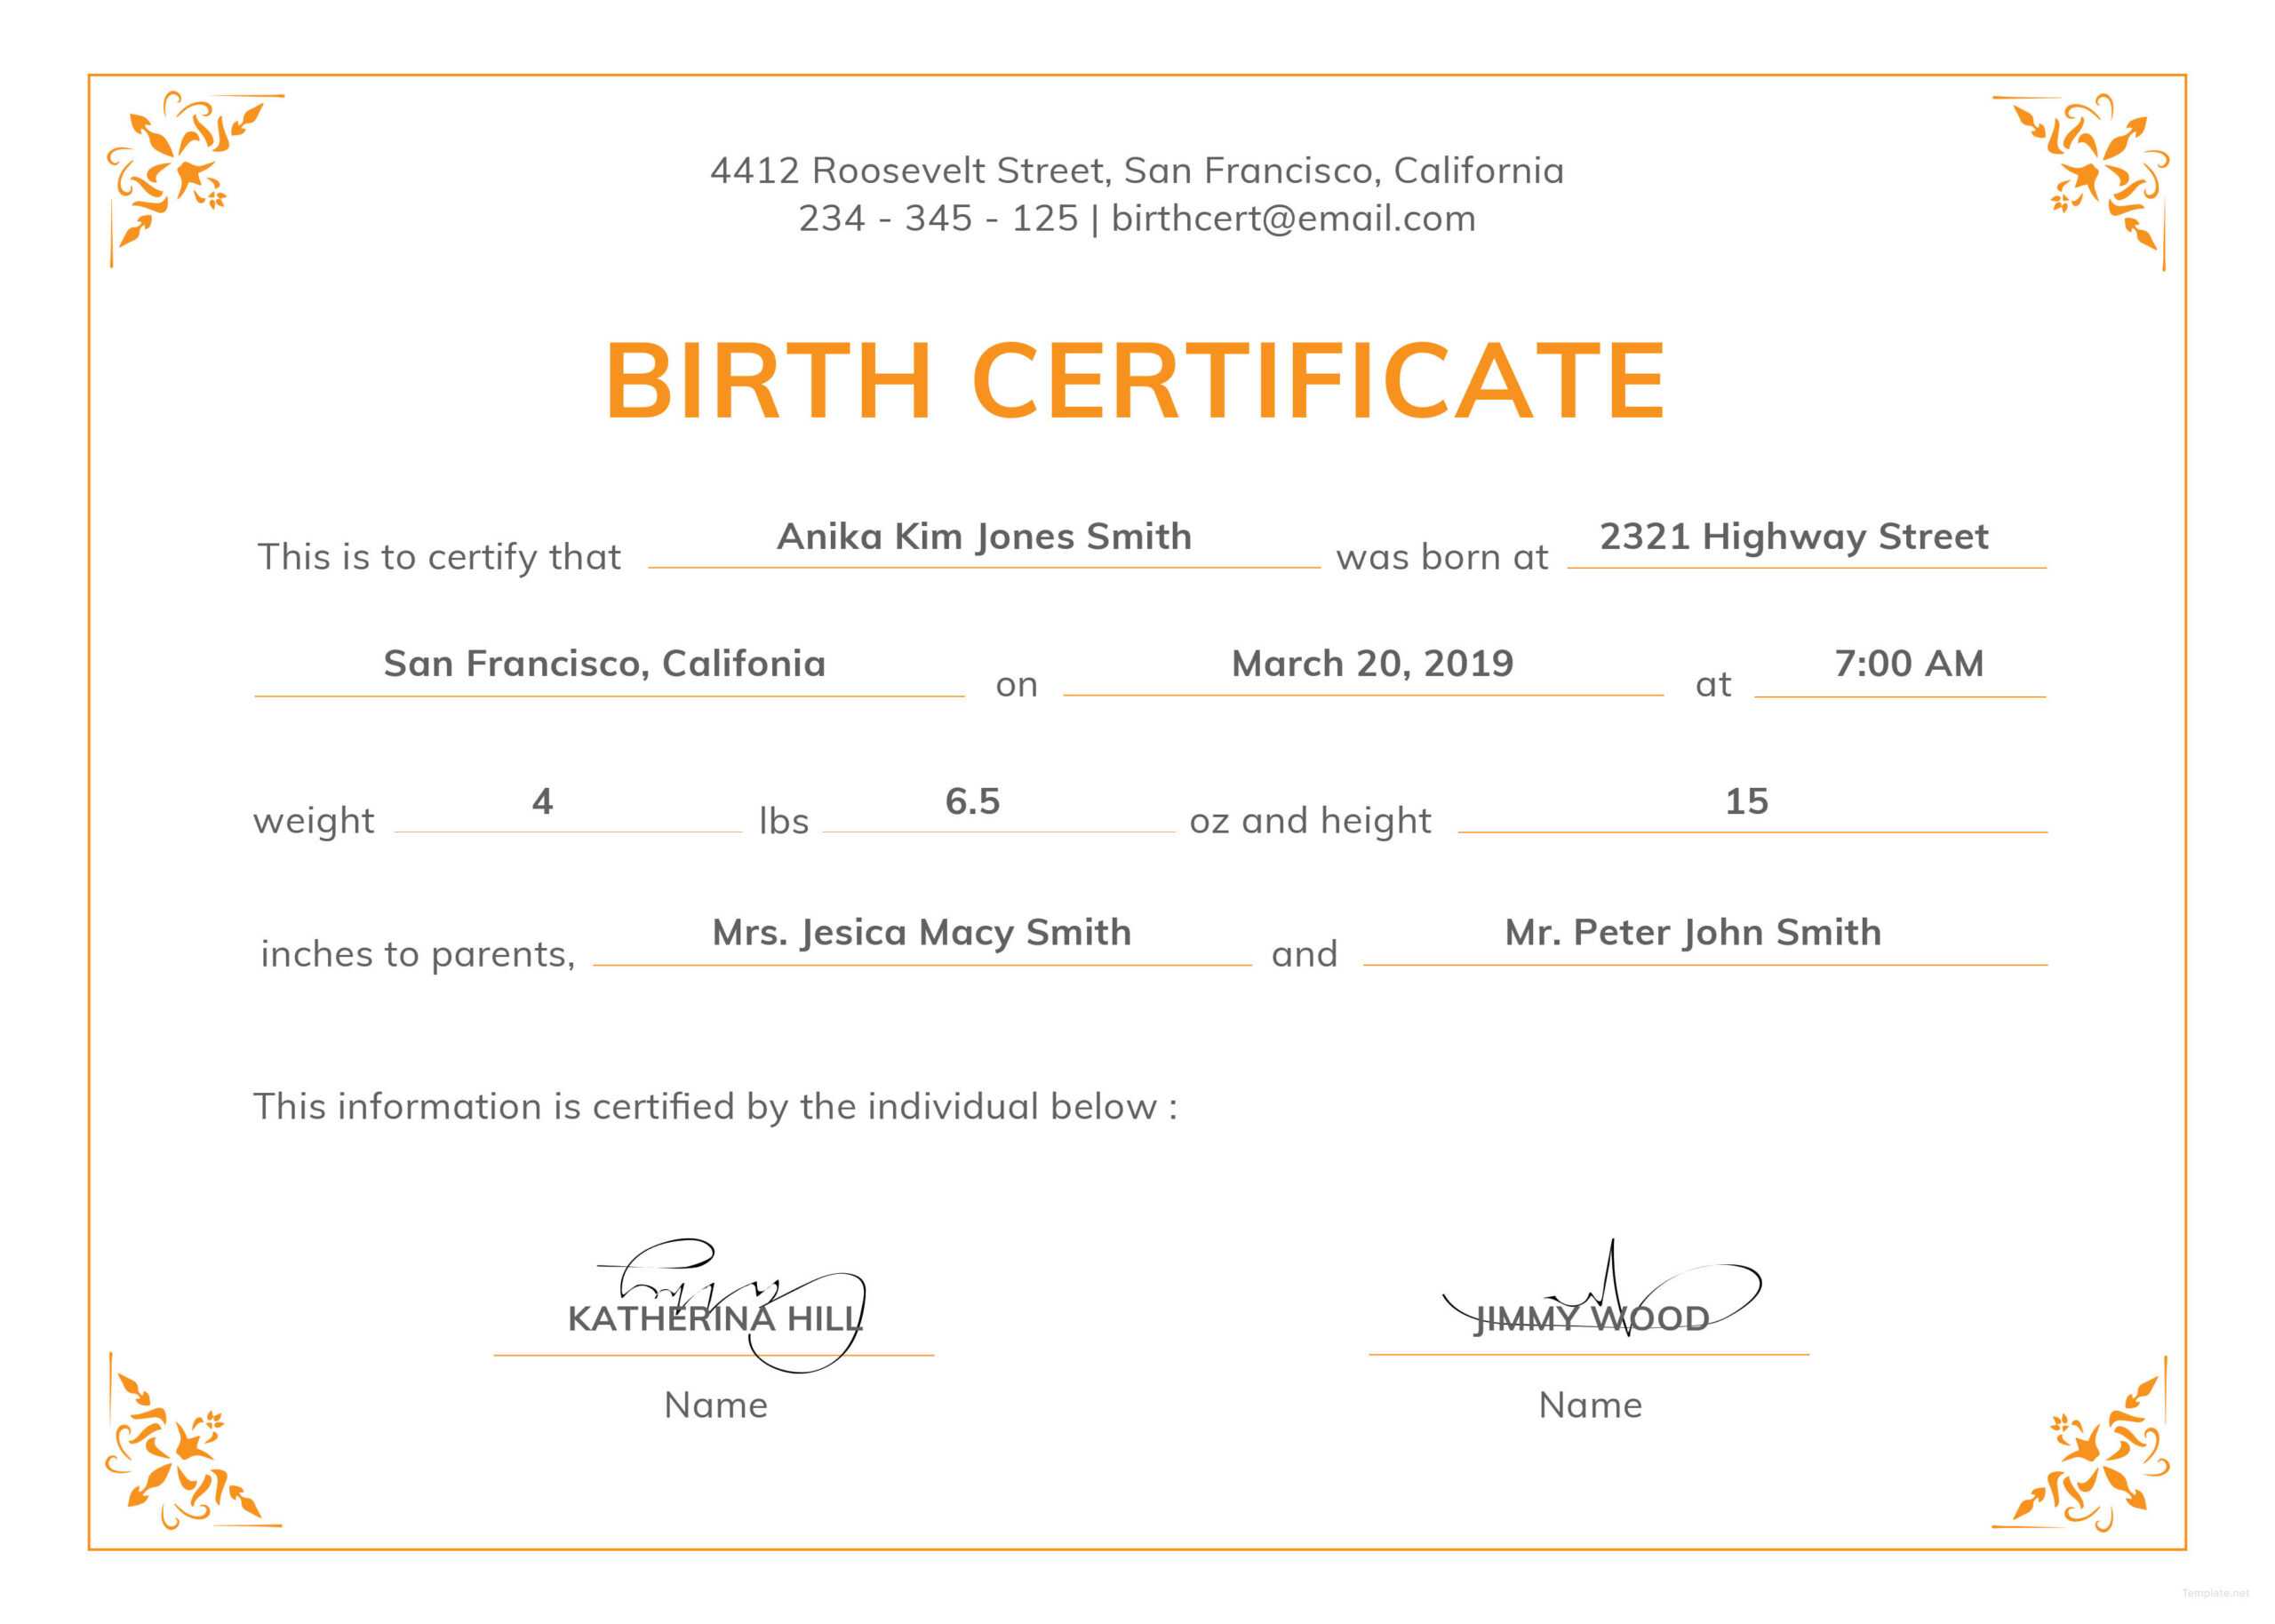 Can Make A Delivery Certificate Crucial | Gift Certificate Regarding Birth Certificate Templates For Word